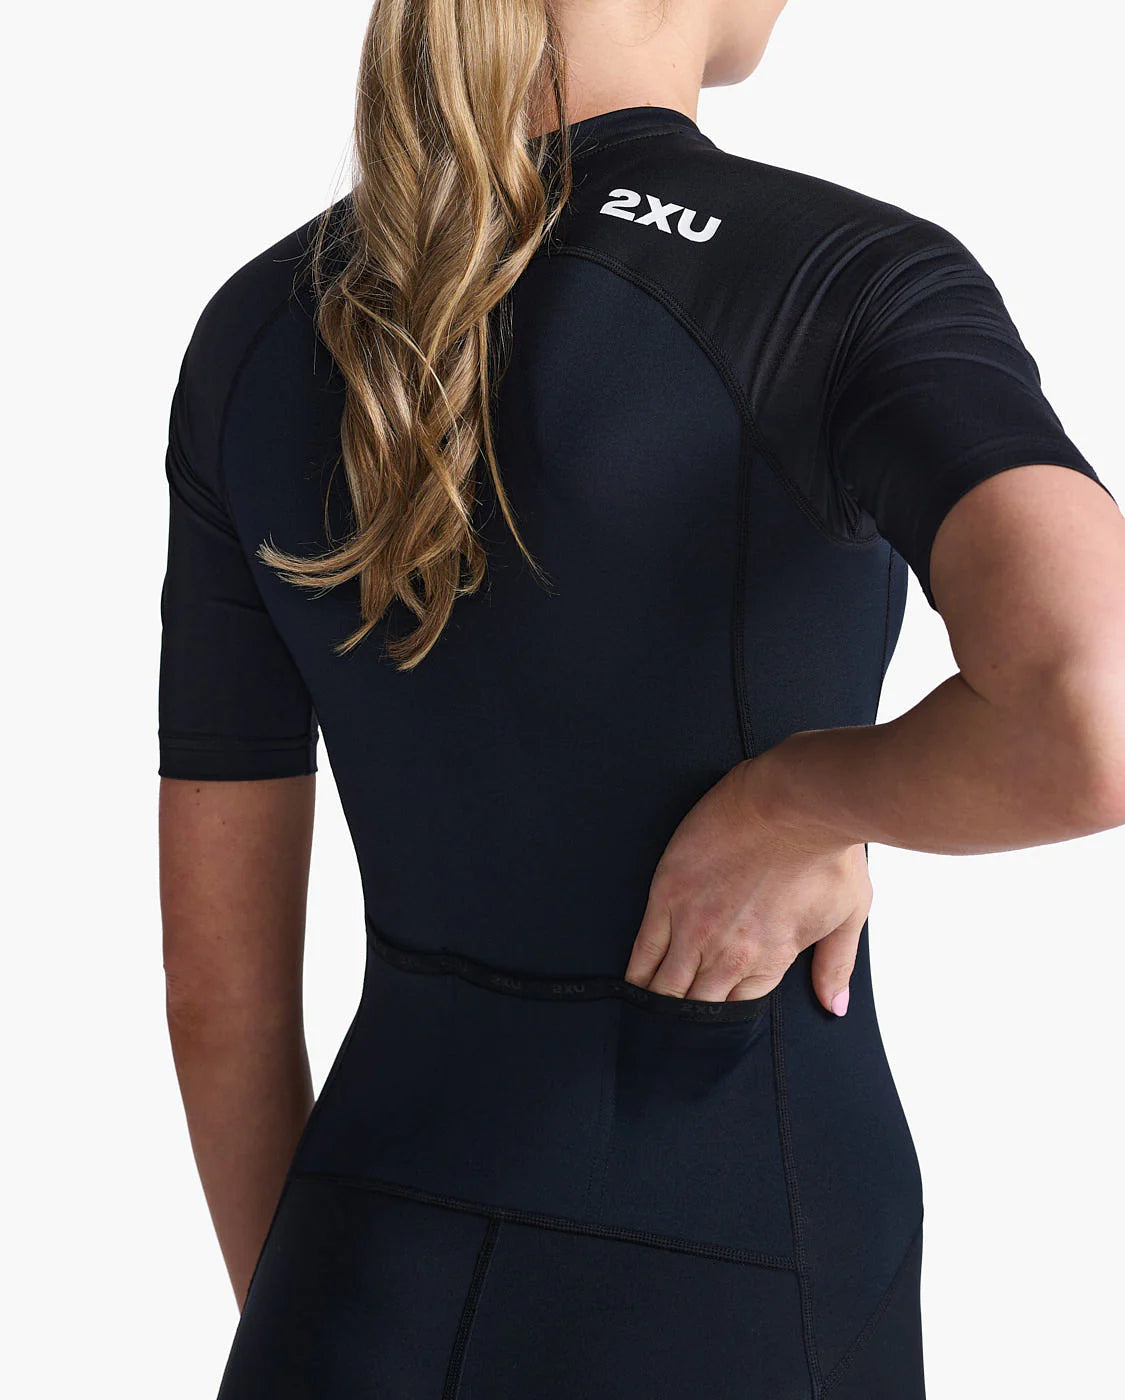 Trisuit Mujer Core Sleeved - Black/White - 2XU